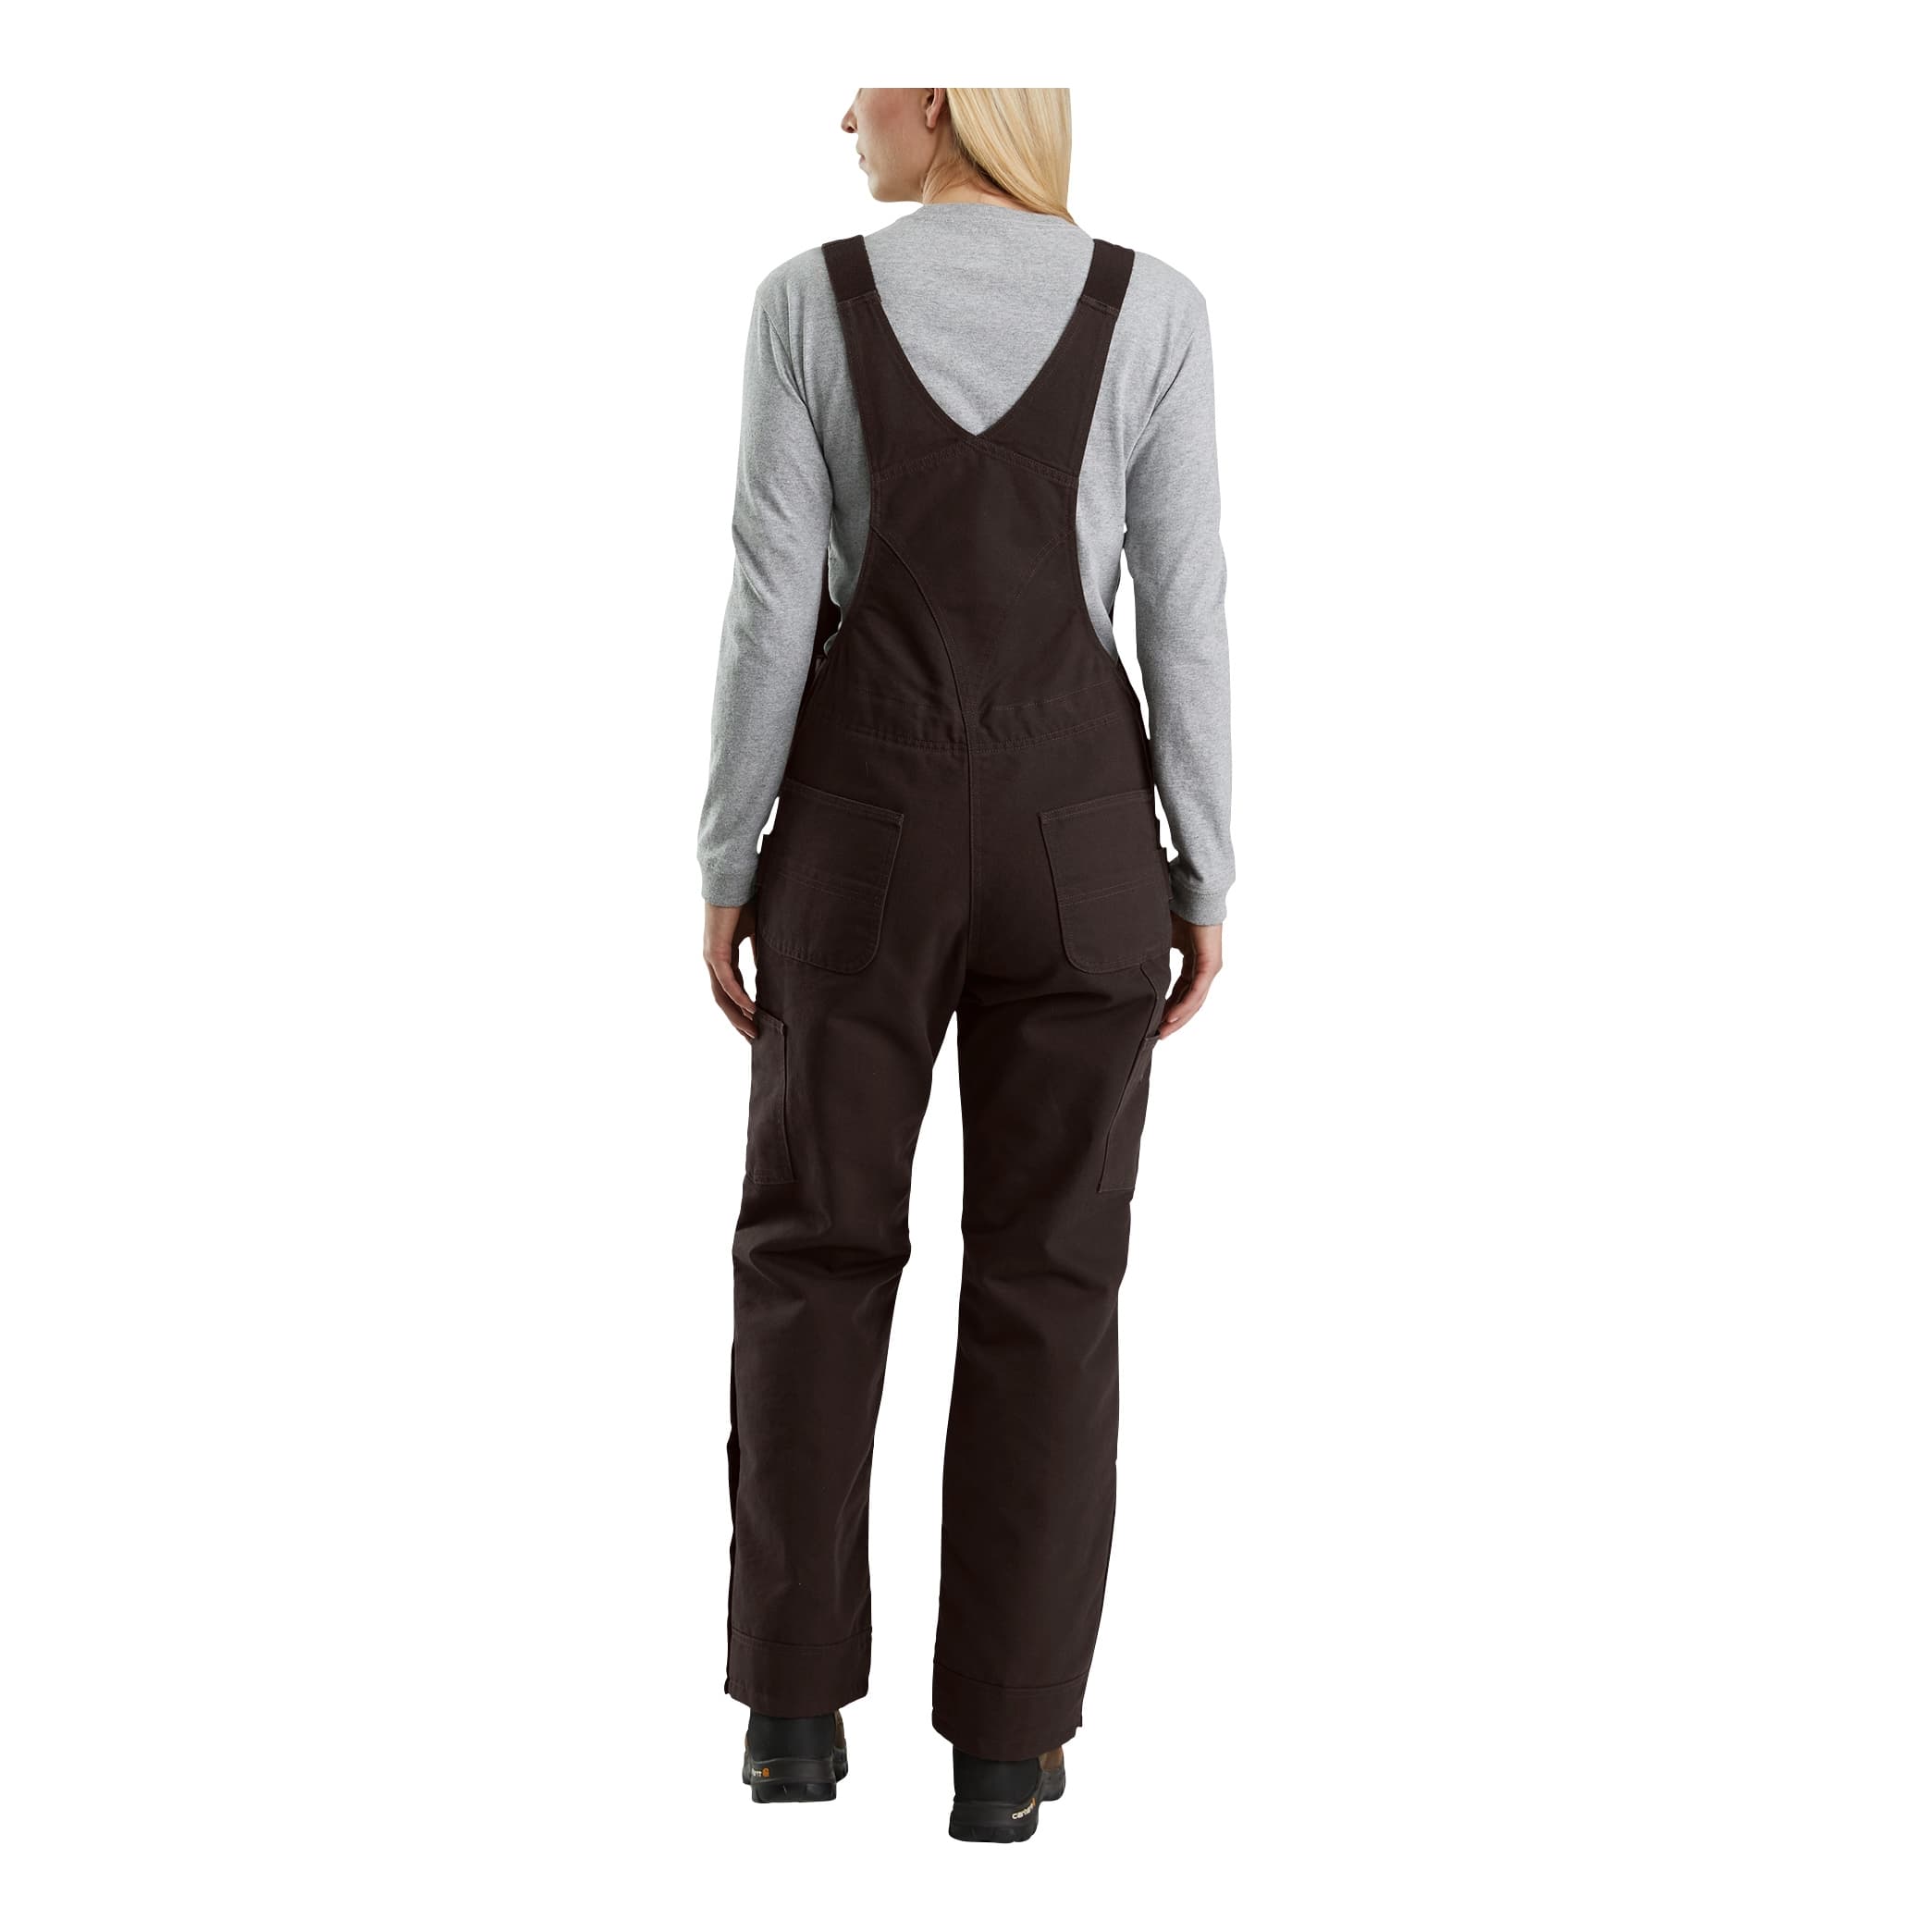 Carhartt, Pants & Jumpsuits, Carhartt Force Utility Knit Leggings Gray  And Black Size Extra Large Tall